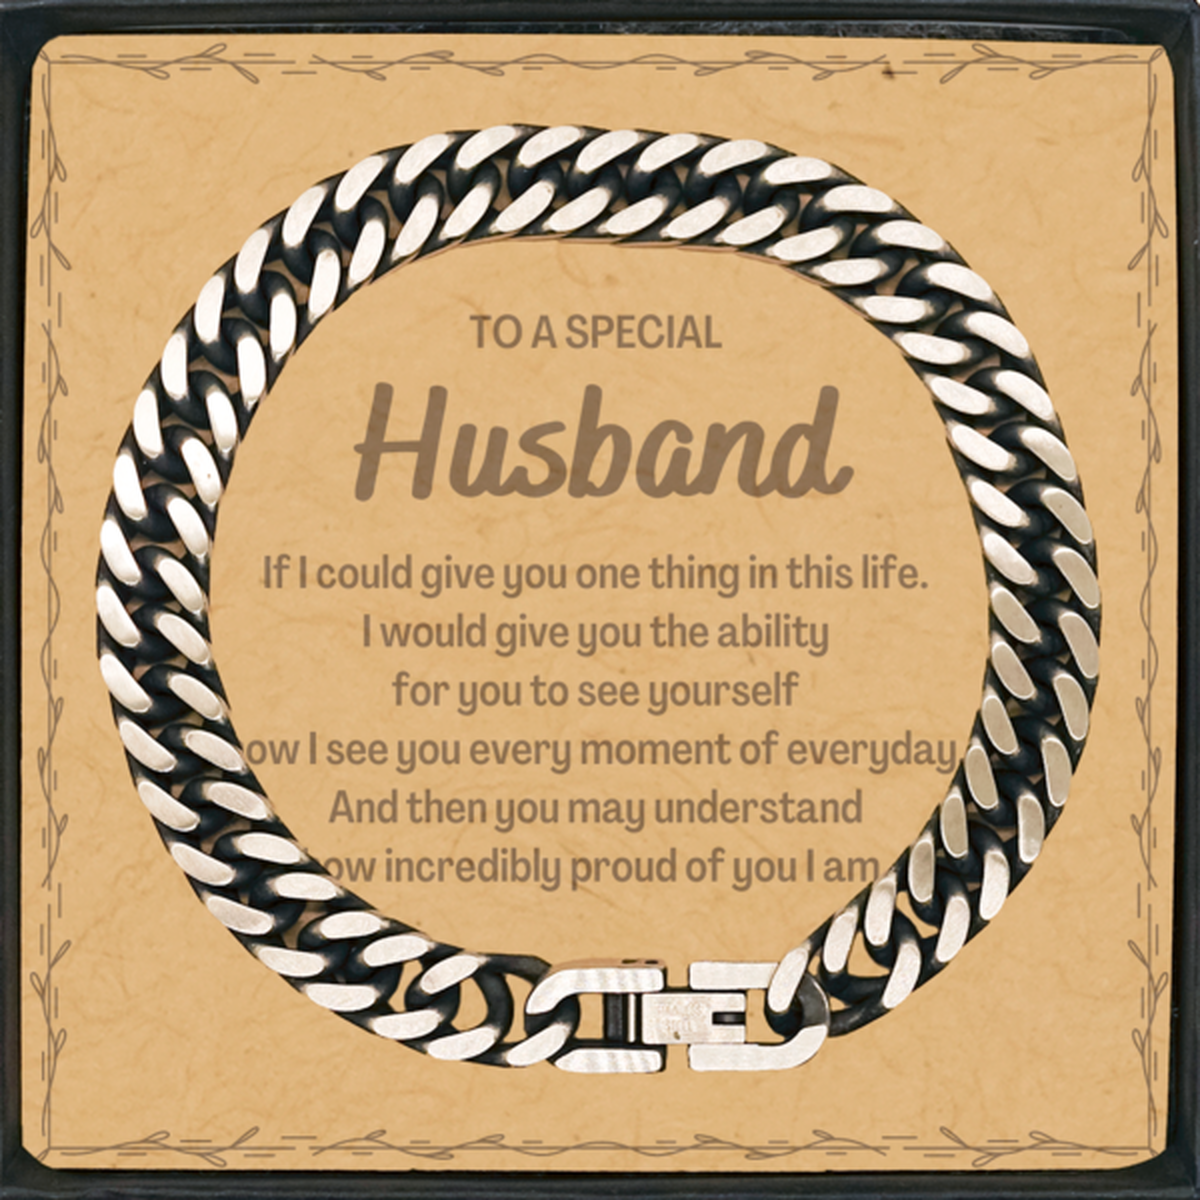 To My Husband Cuban Link Chain Bracelet, Gifts For Husband Message Card, Inspirational Gifts for Christmas Birthday, Epic Gifts for Husband To A Special Husband how incredibly proud of you I am